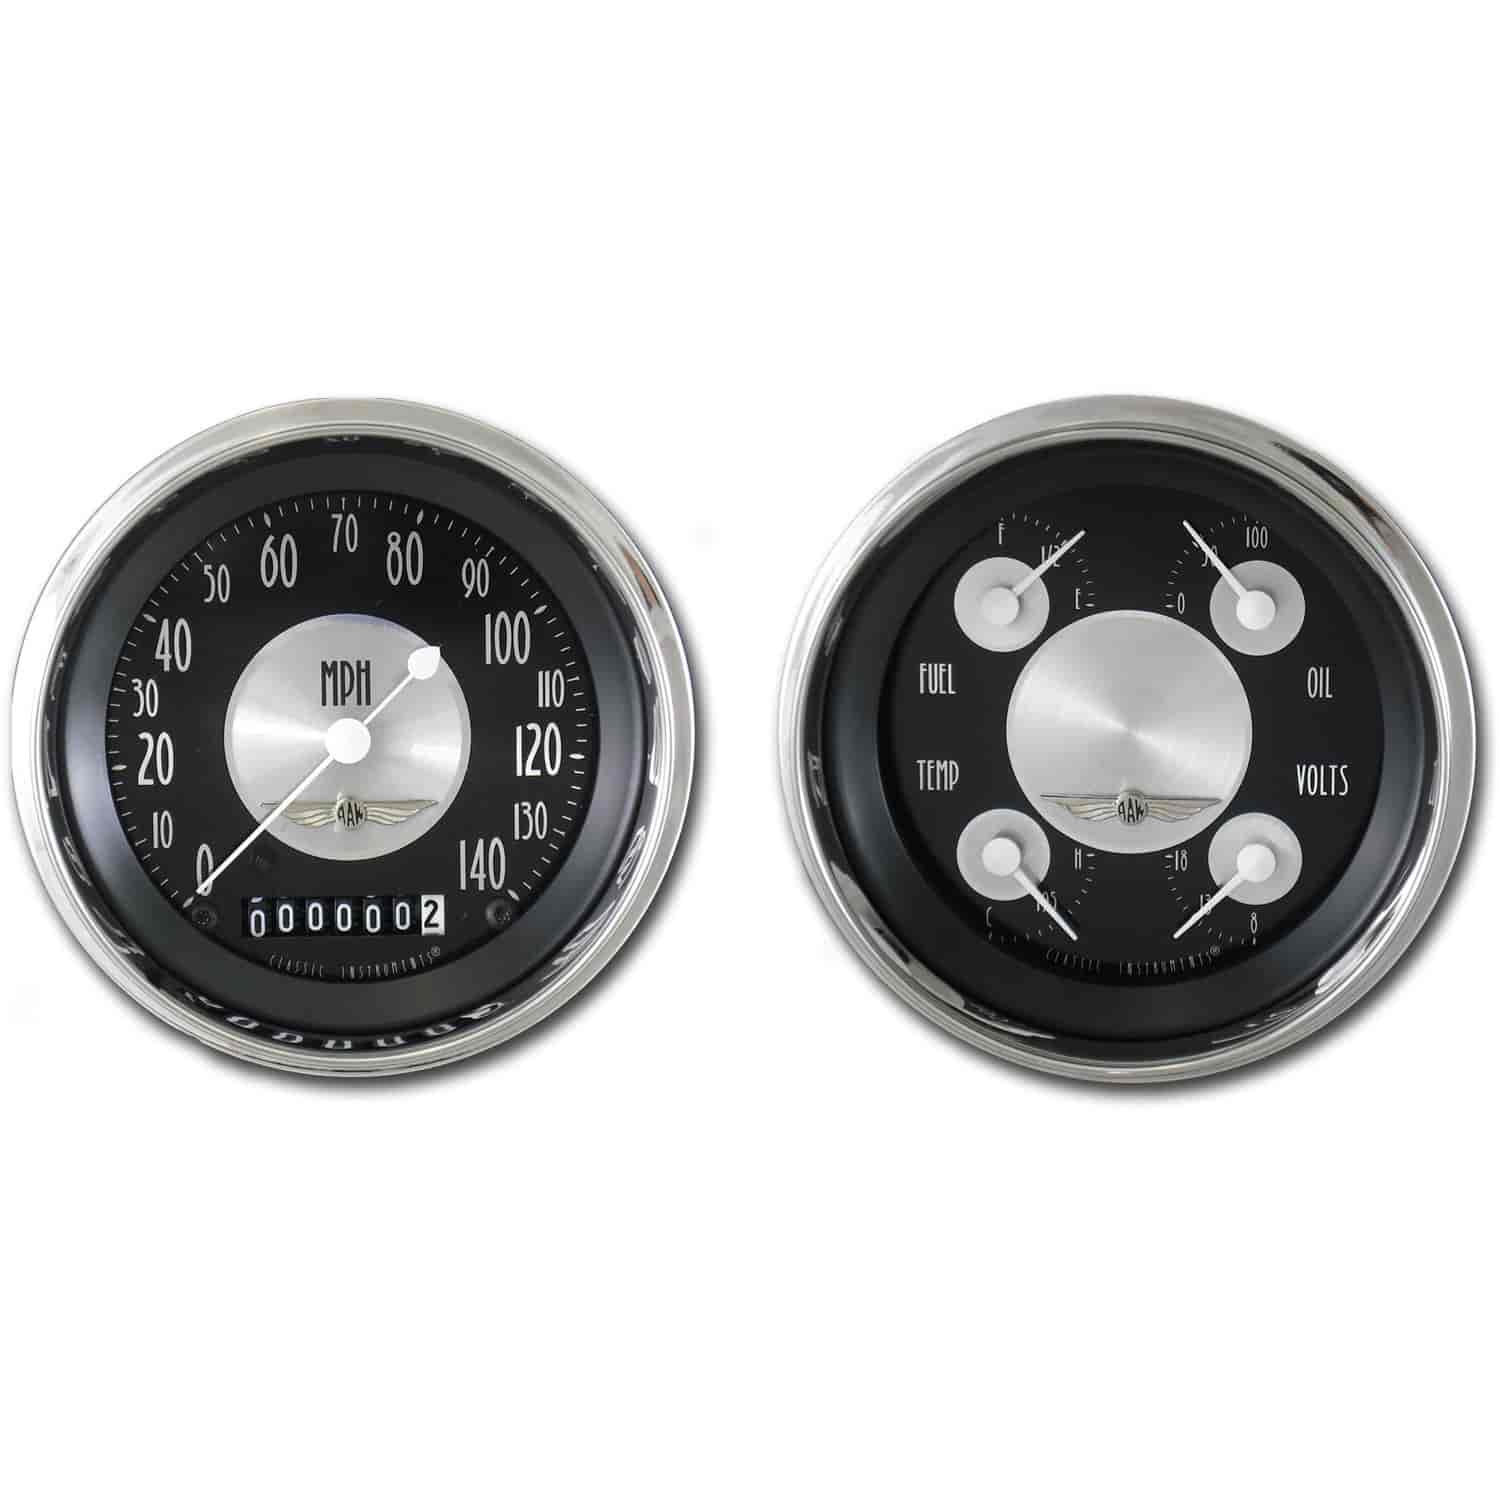 All American Tradition 2-Gauge Set 3-3/8" Electrical Speedometer (140 mph)